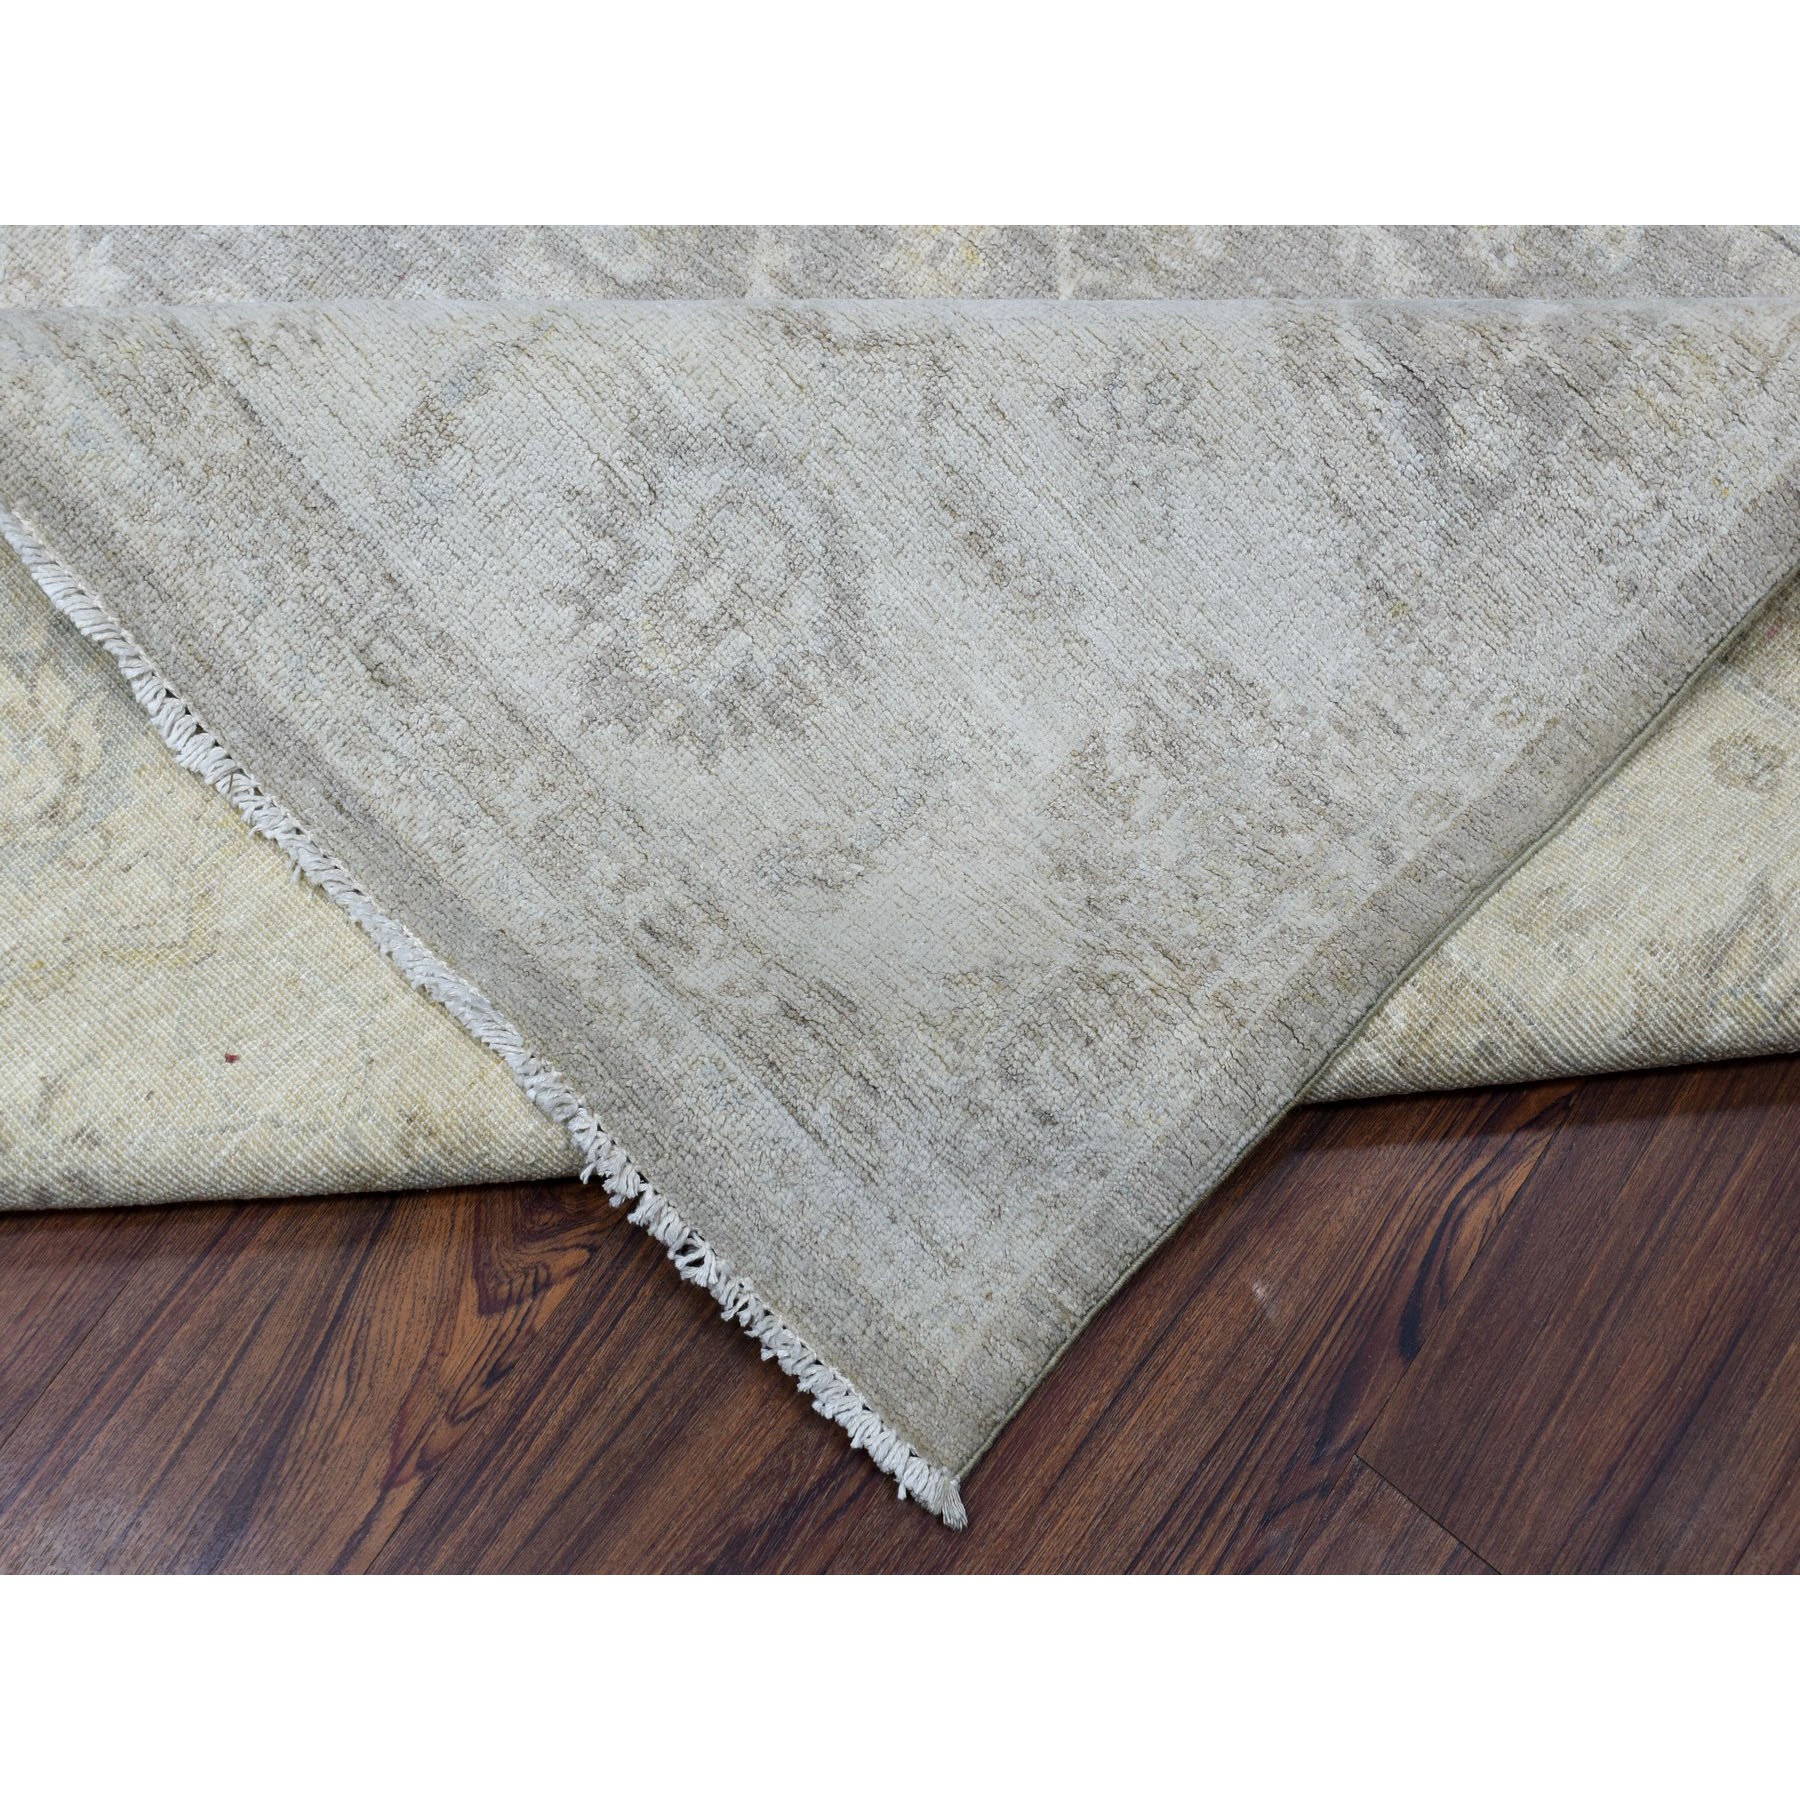 8-1 x9-10  White Wash Peshawar Mahal Design Pure Wool Hand Knotted Oriental Rug 